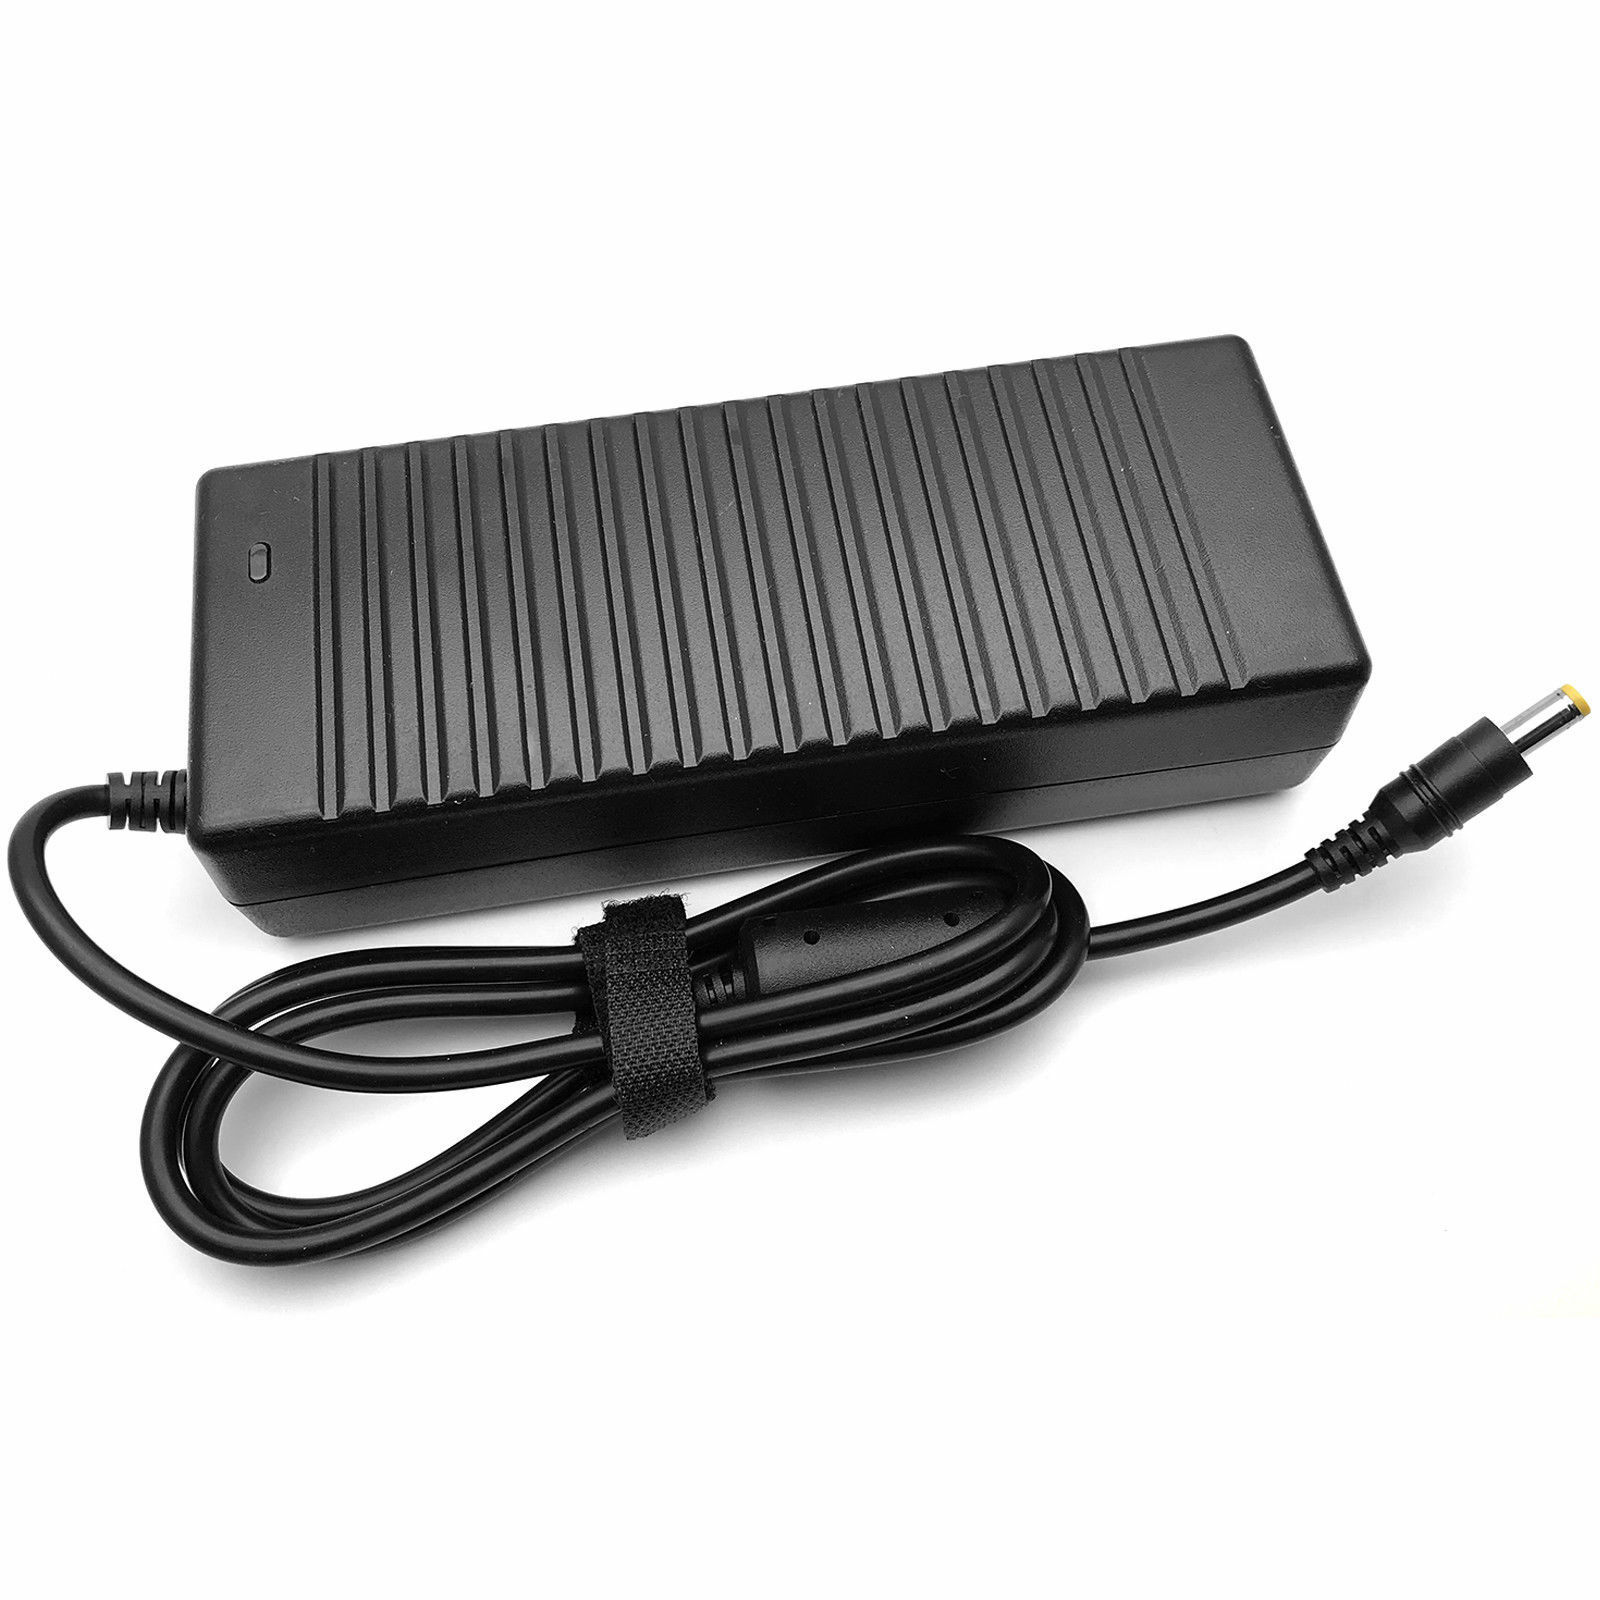 15.6V AC Adapter Charger For Panasonic Toughbook CF-19 CF31 CF52 CF-53 CF-53S - image 4 of 5